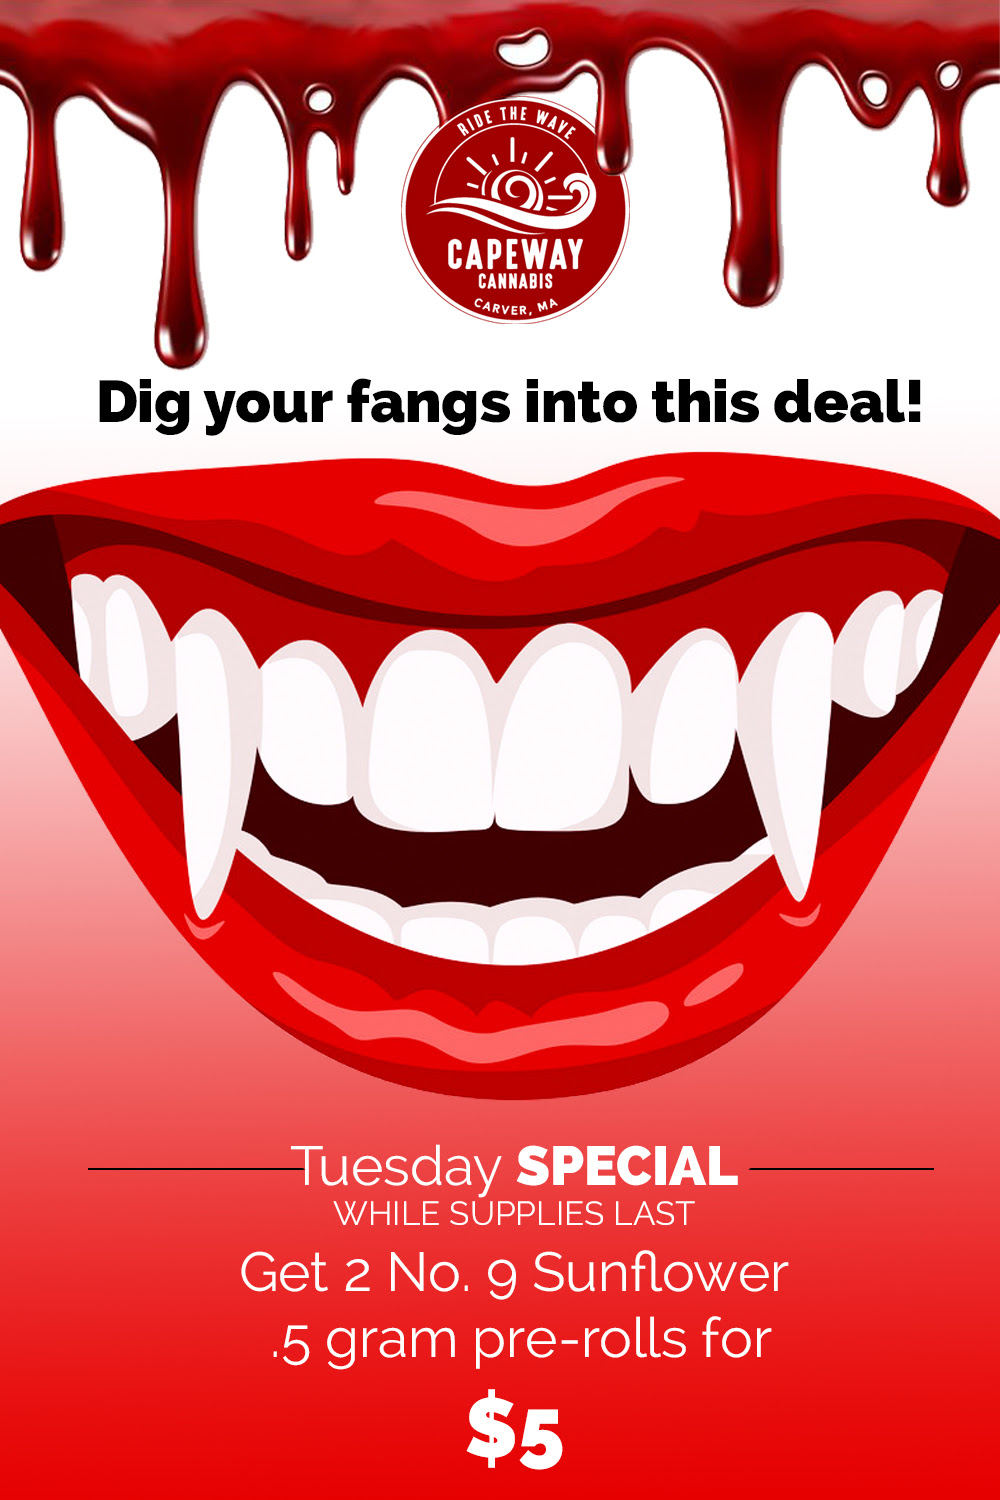 Dig your fangs ad